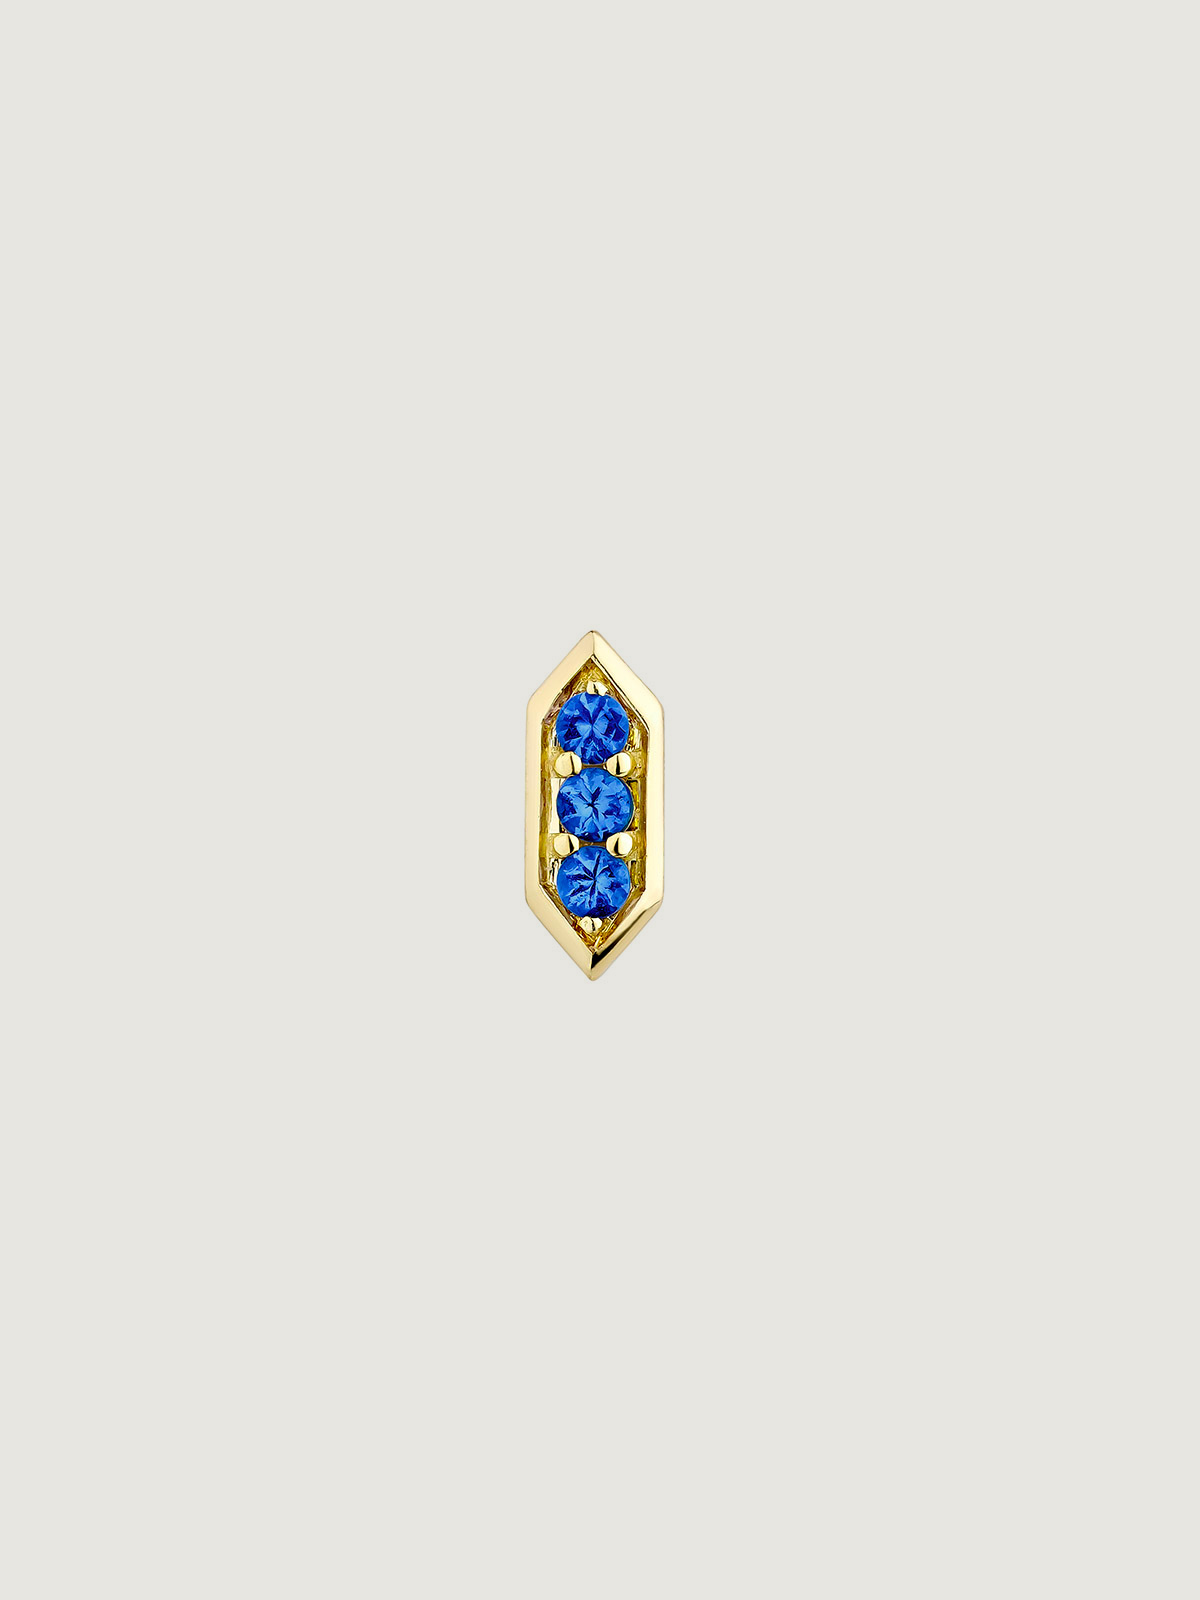 Hexagonal piercing of 18k yellow gold with blue sapphires